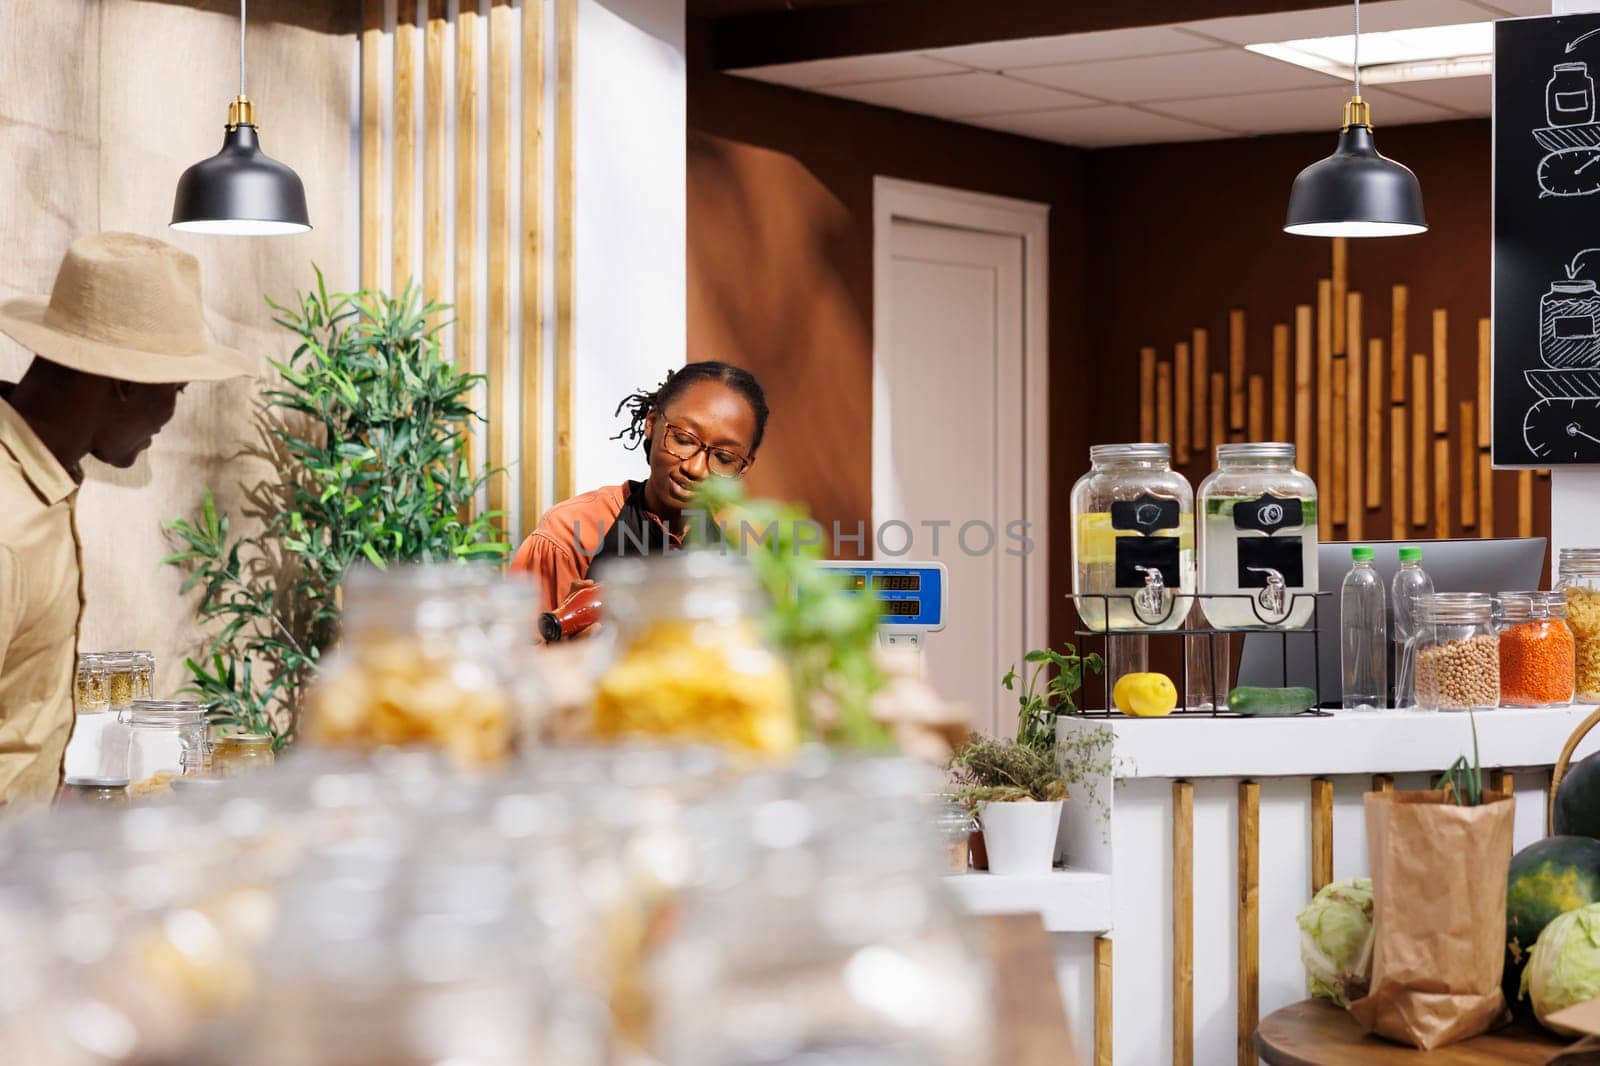 At the checkout desk, a young black woman is taking goods out of the basket for weighing. African American female cashier being of service to the male customer at the counter.